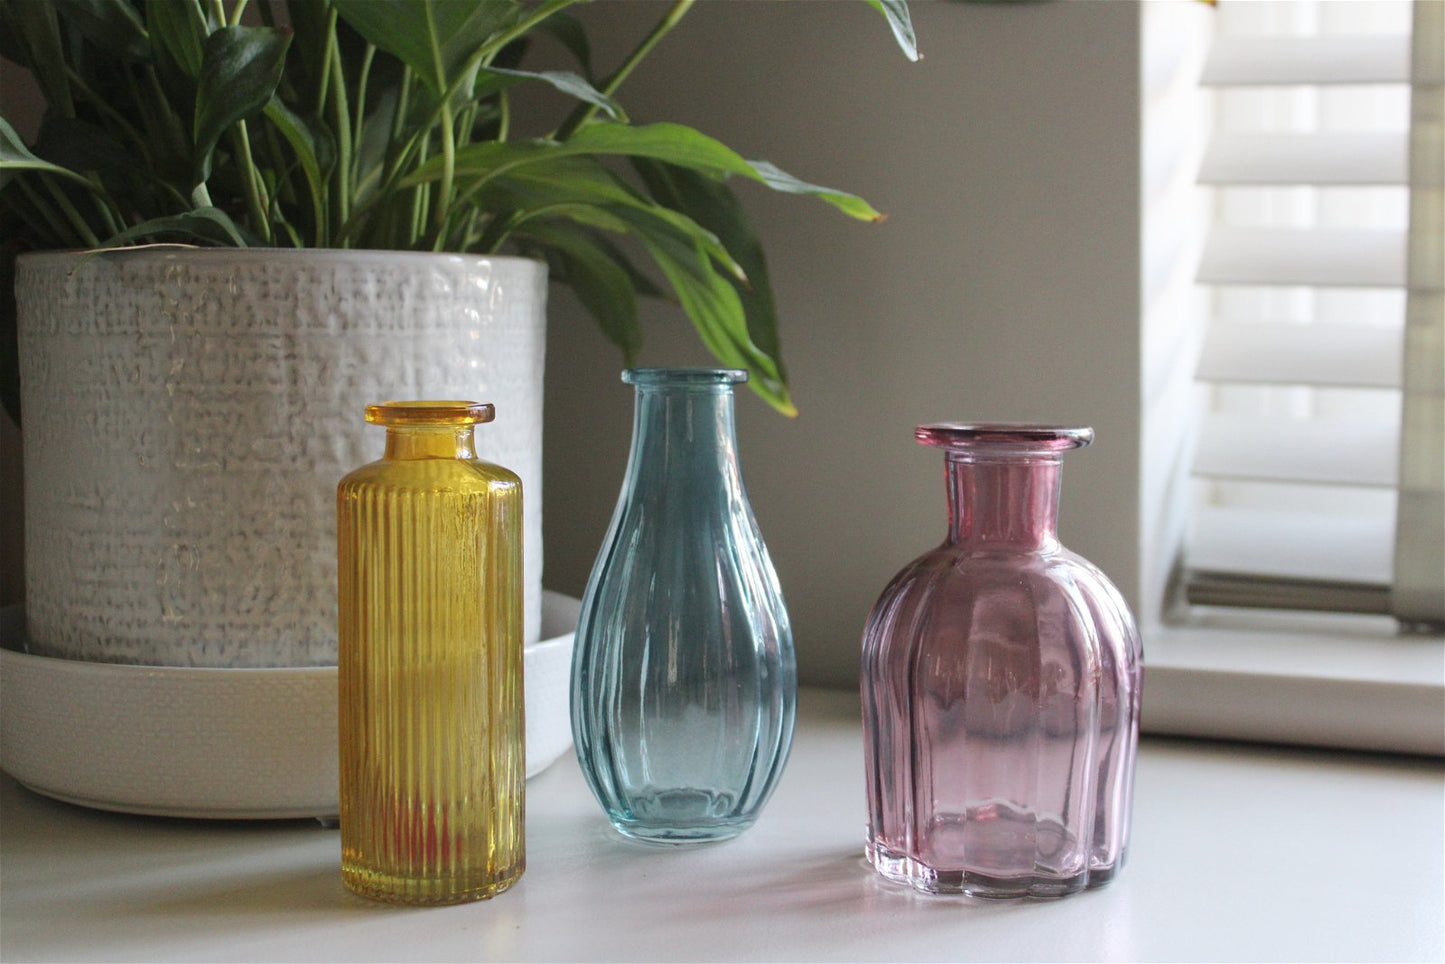 Set of Three Colour Glass Vases - a Cheeky Plant